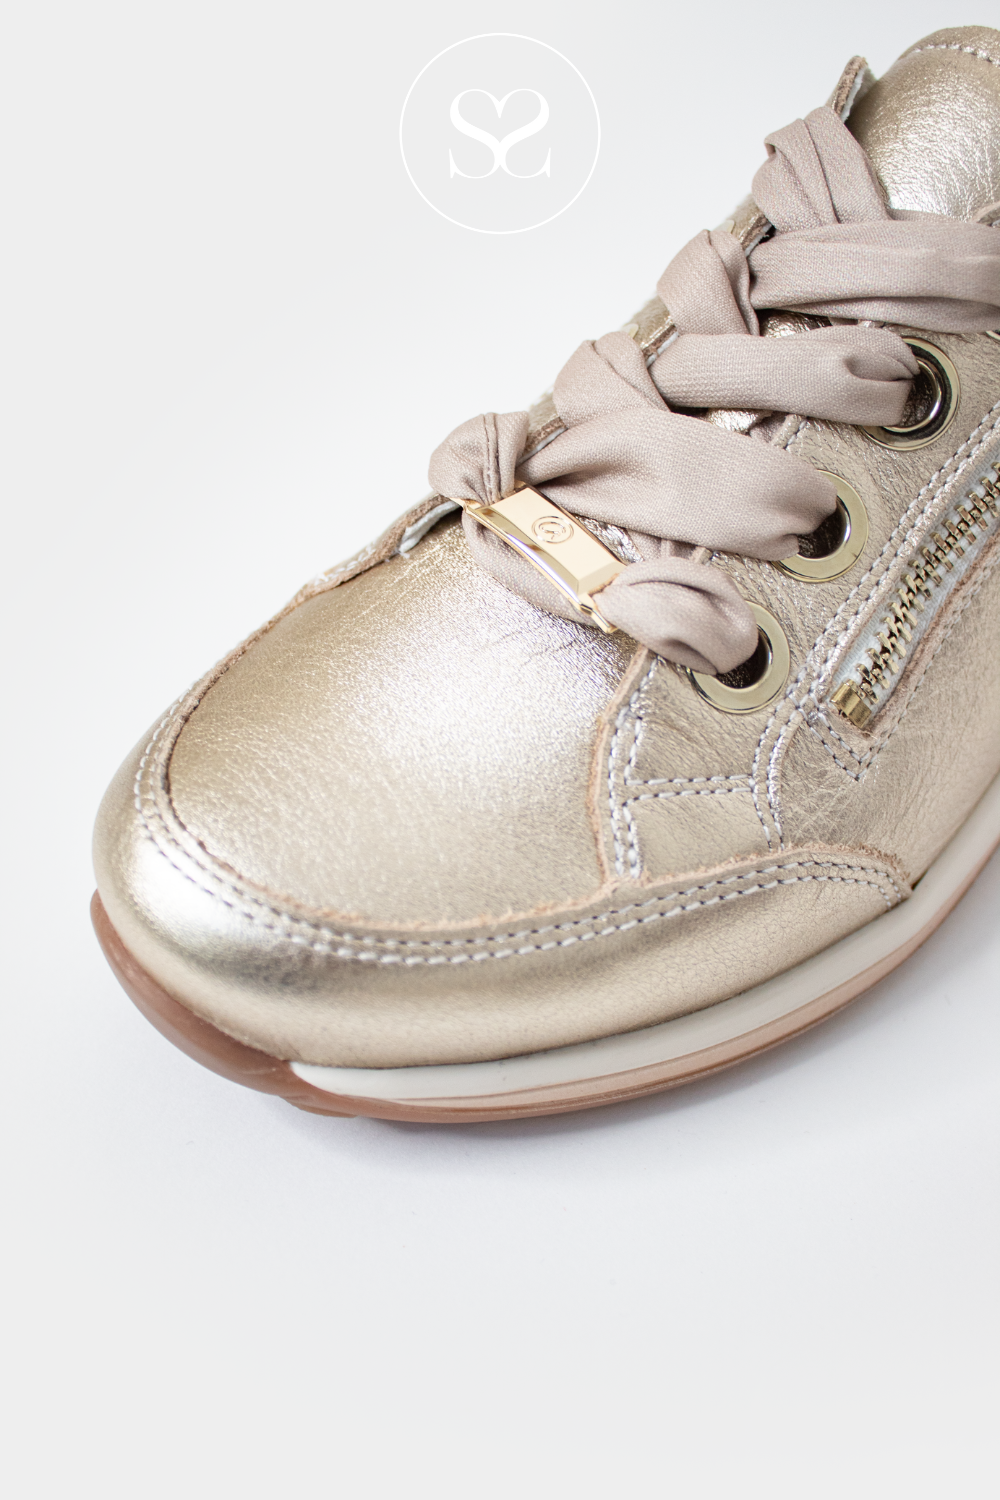 ARA GOLD LEATHER WALKING TRAINERS WITH FABRIC LACES AND SIDE ZIP. sOFT CUSHIONED INSOLE